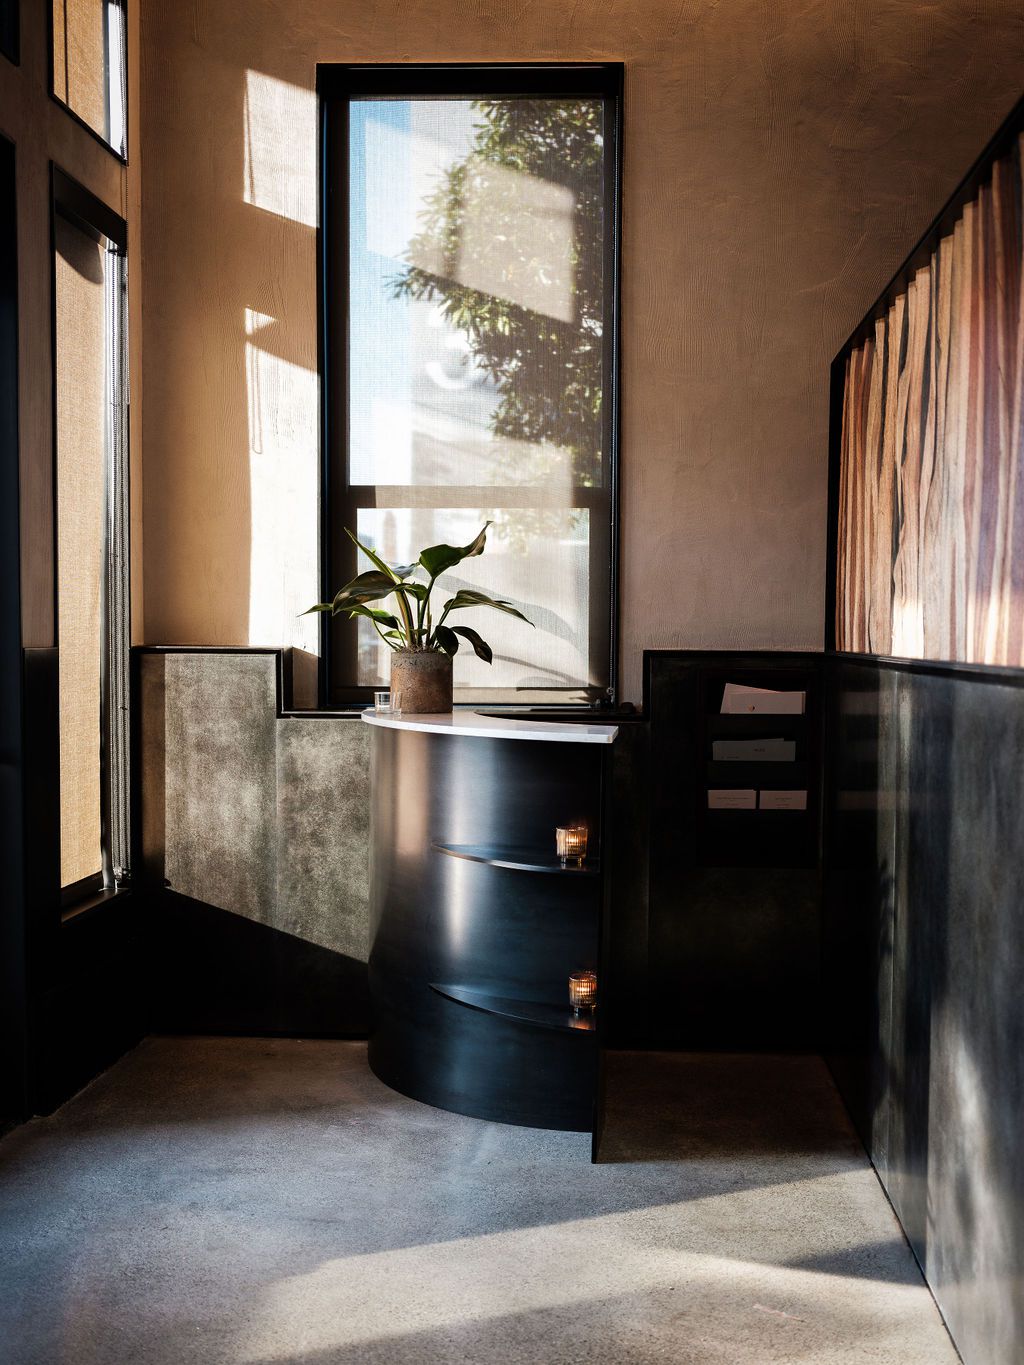 The entry of Flour + Water with a rounded black metal host stand and concrete floors.